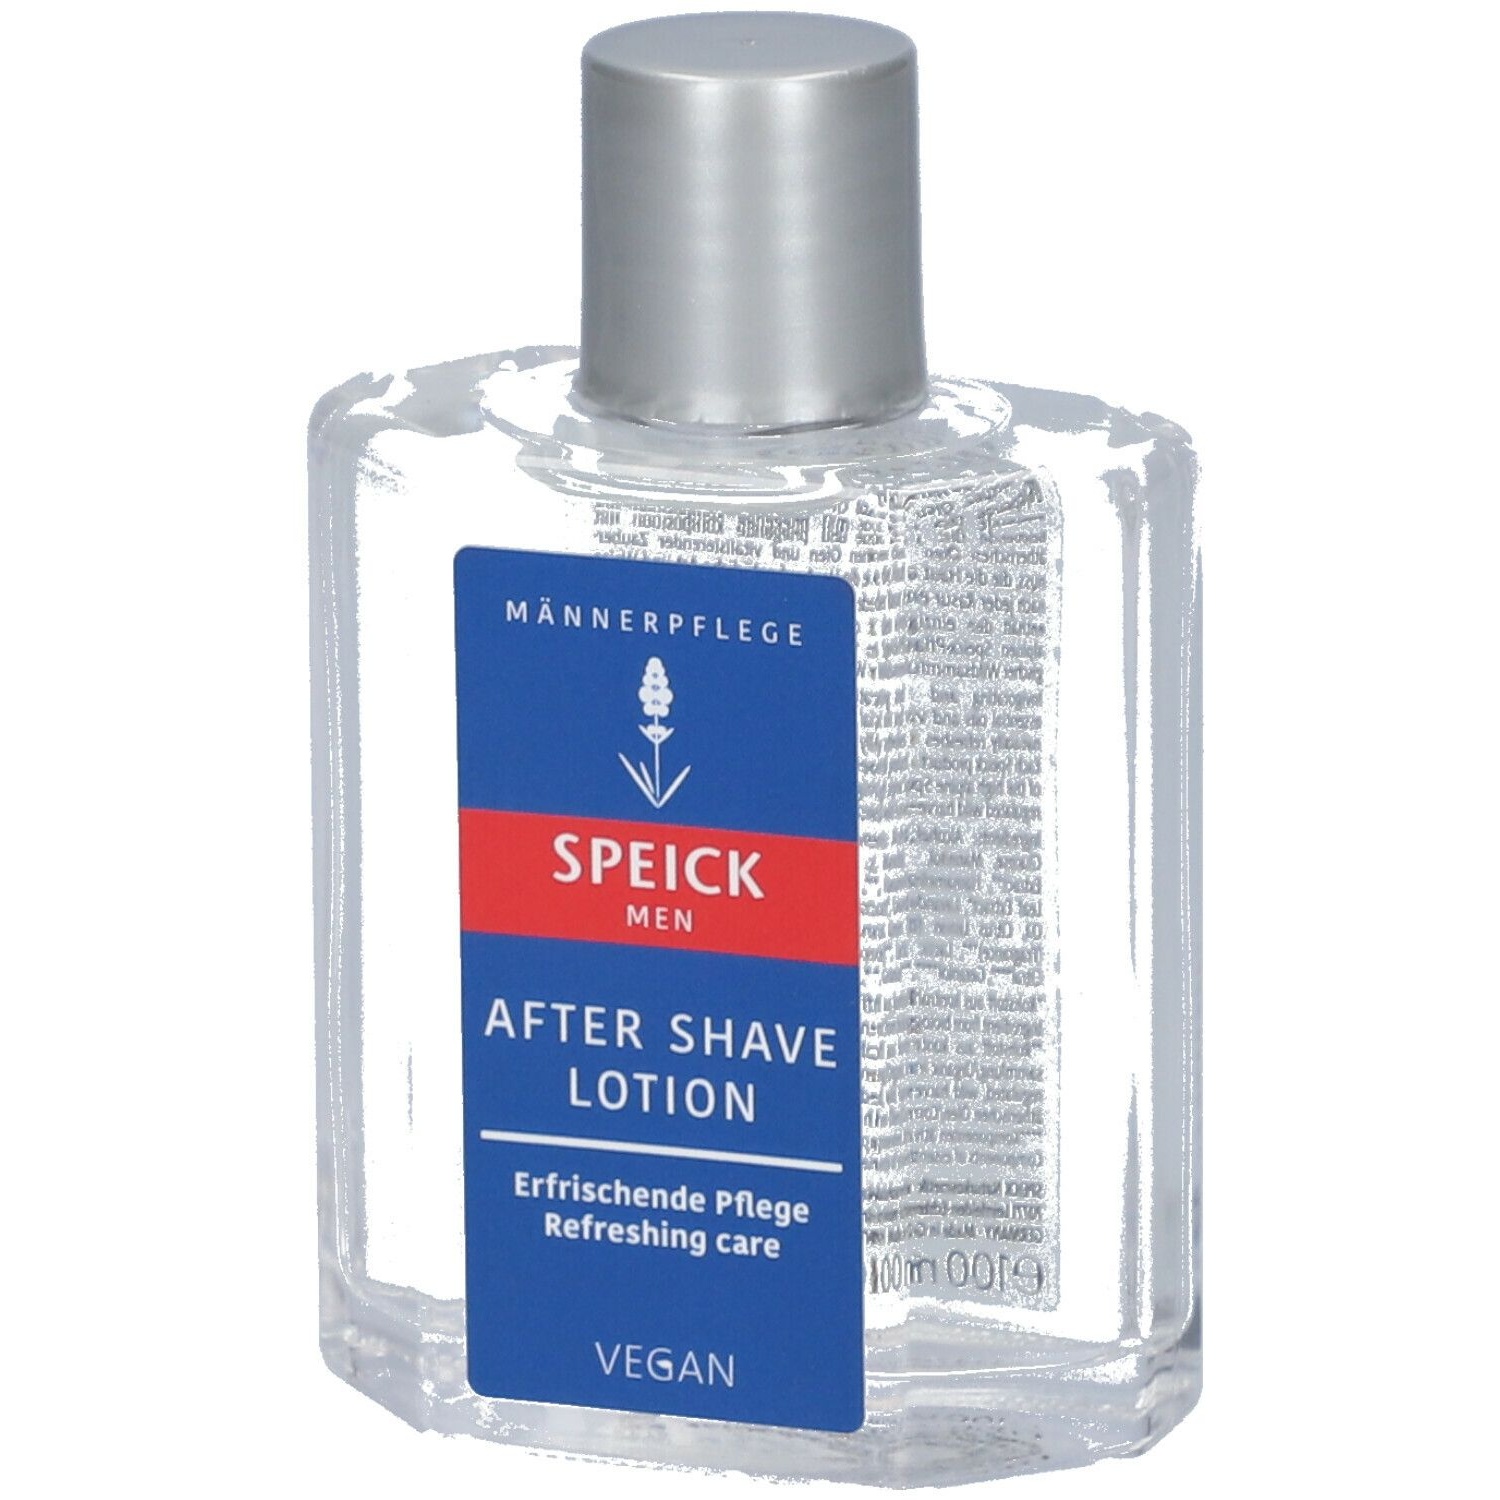 speick men after shave lotion